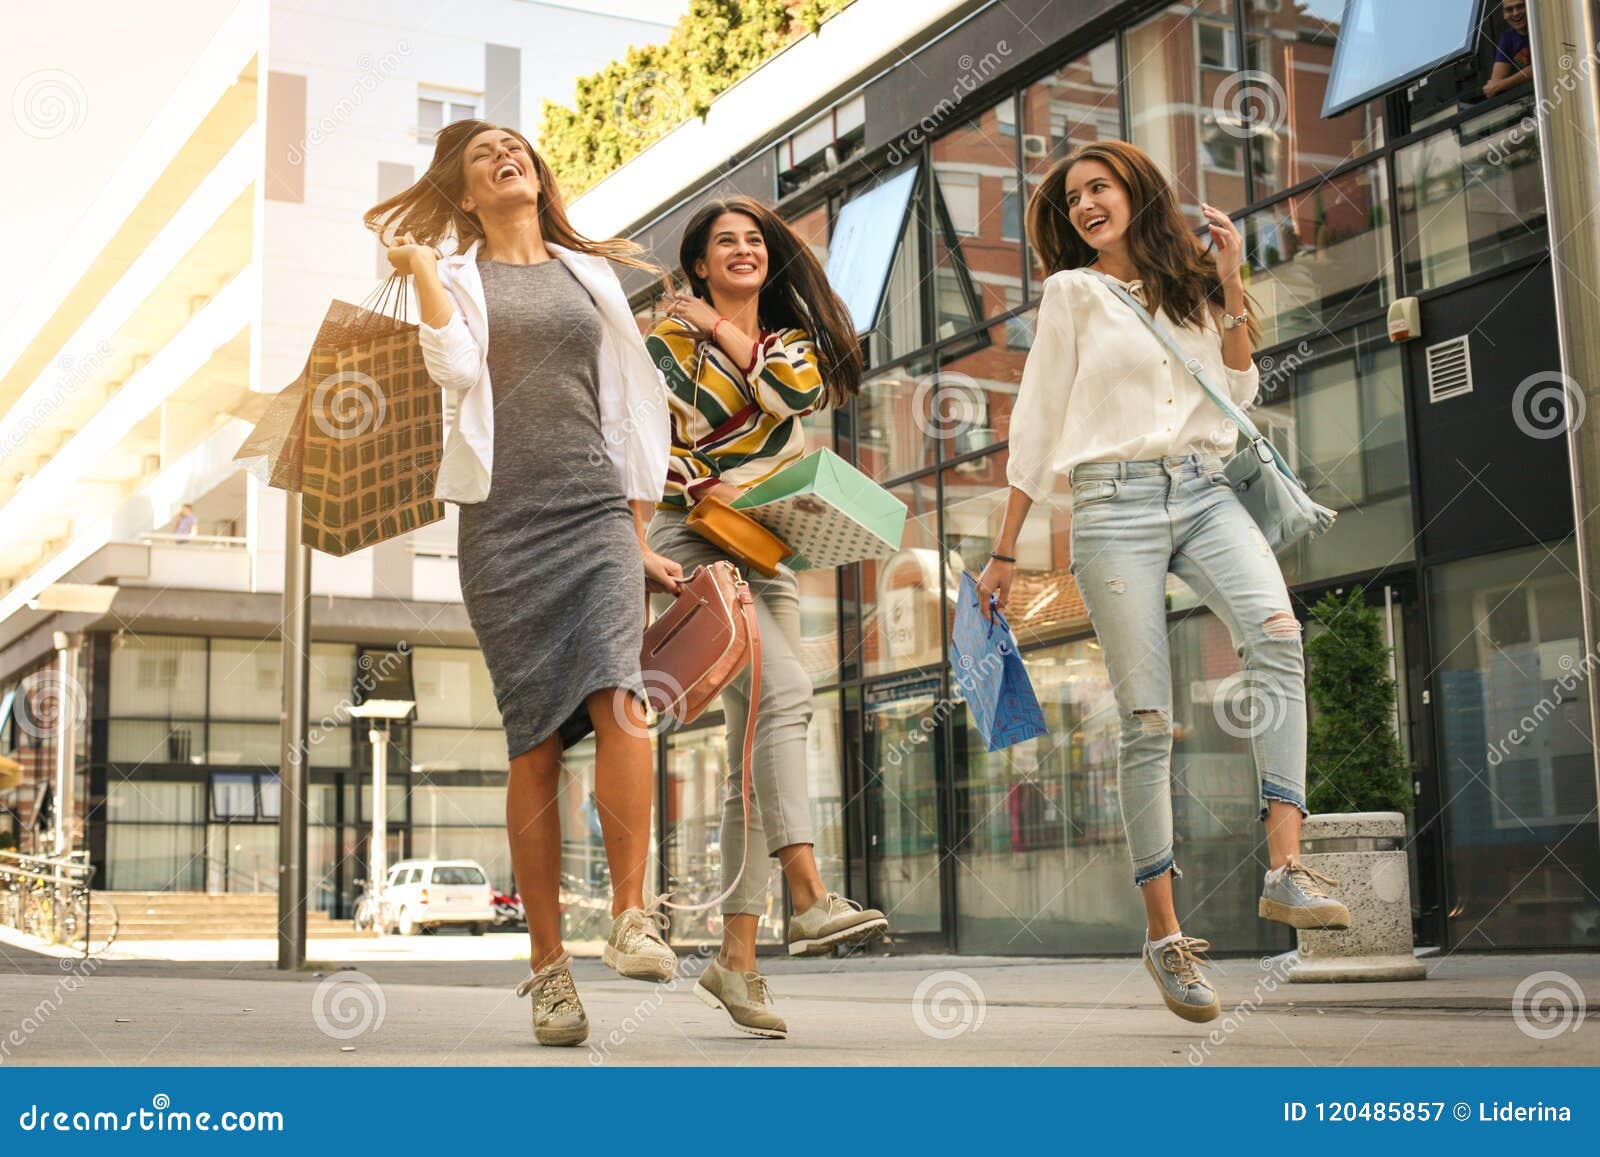 three fashionable young women strolling with shopping bags. satisfied women jumping on street.